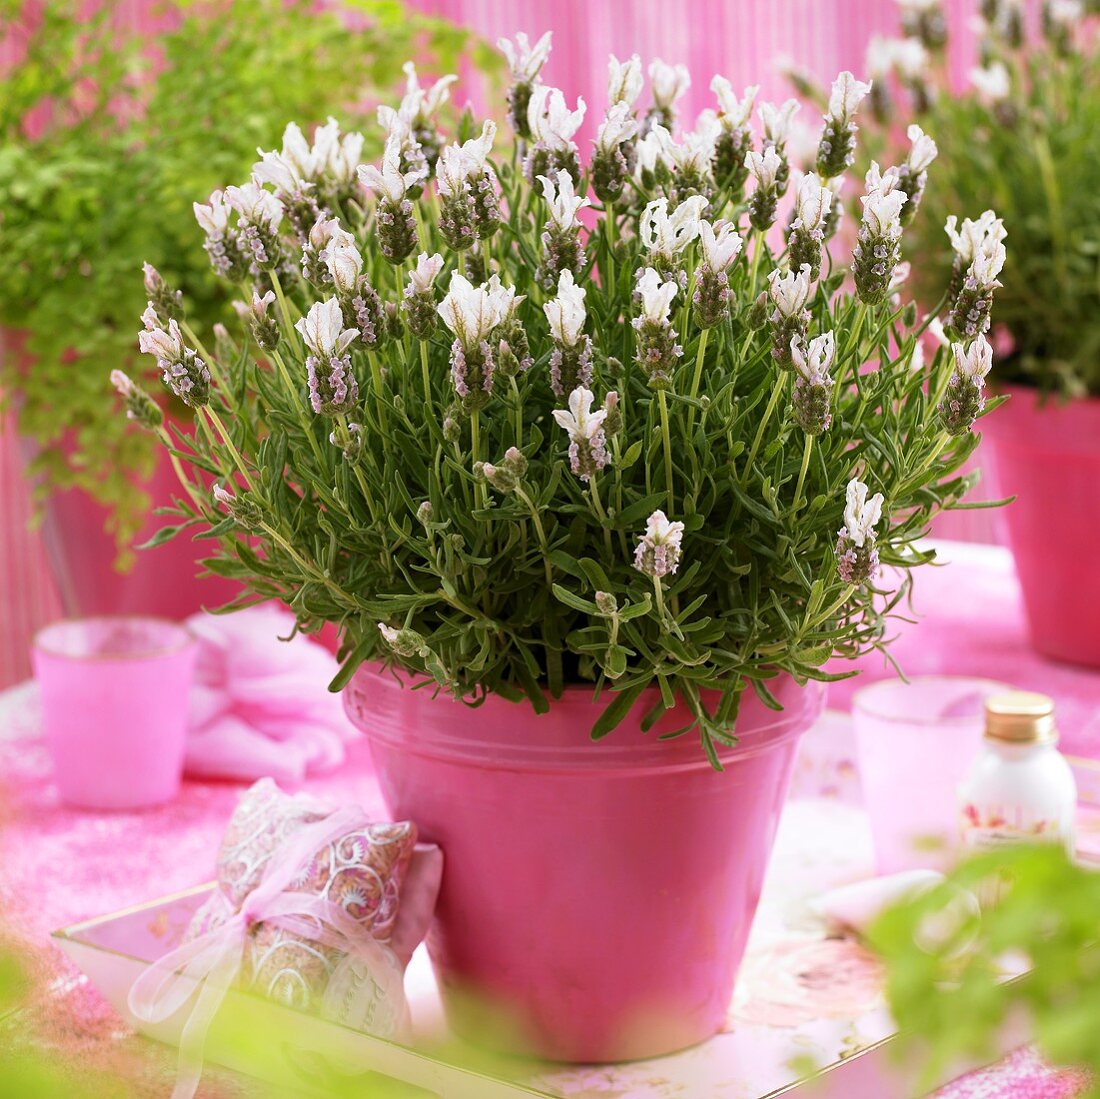 French lavender in pink flowerpot